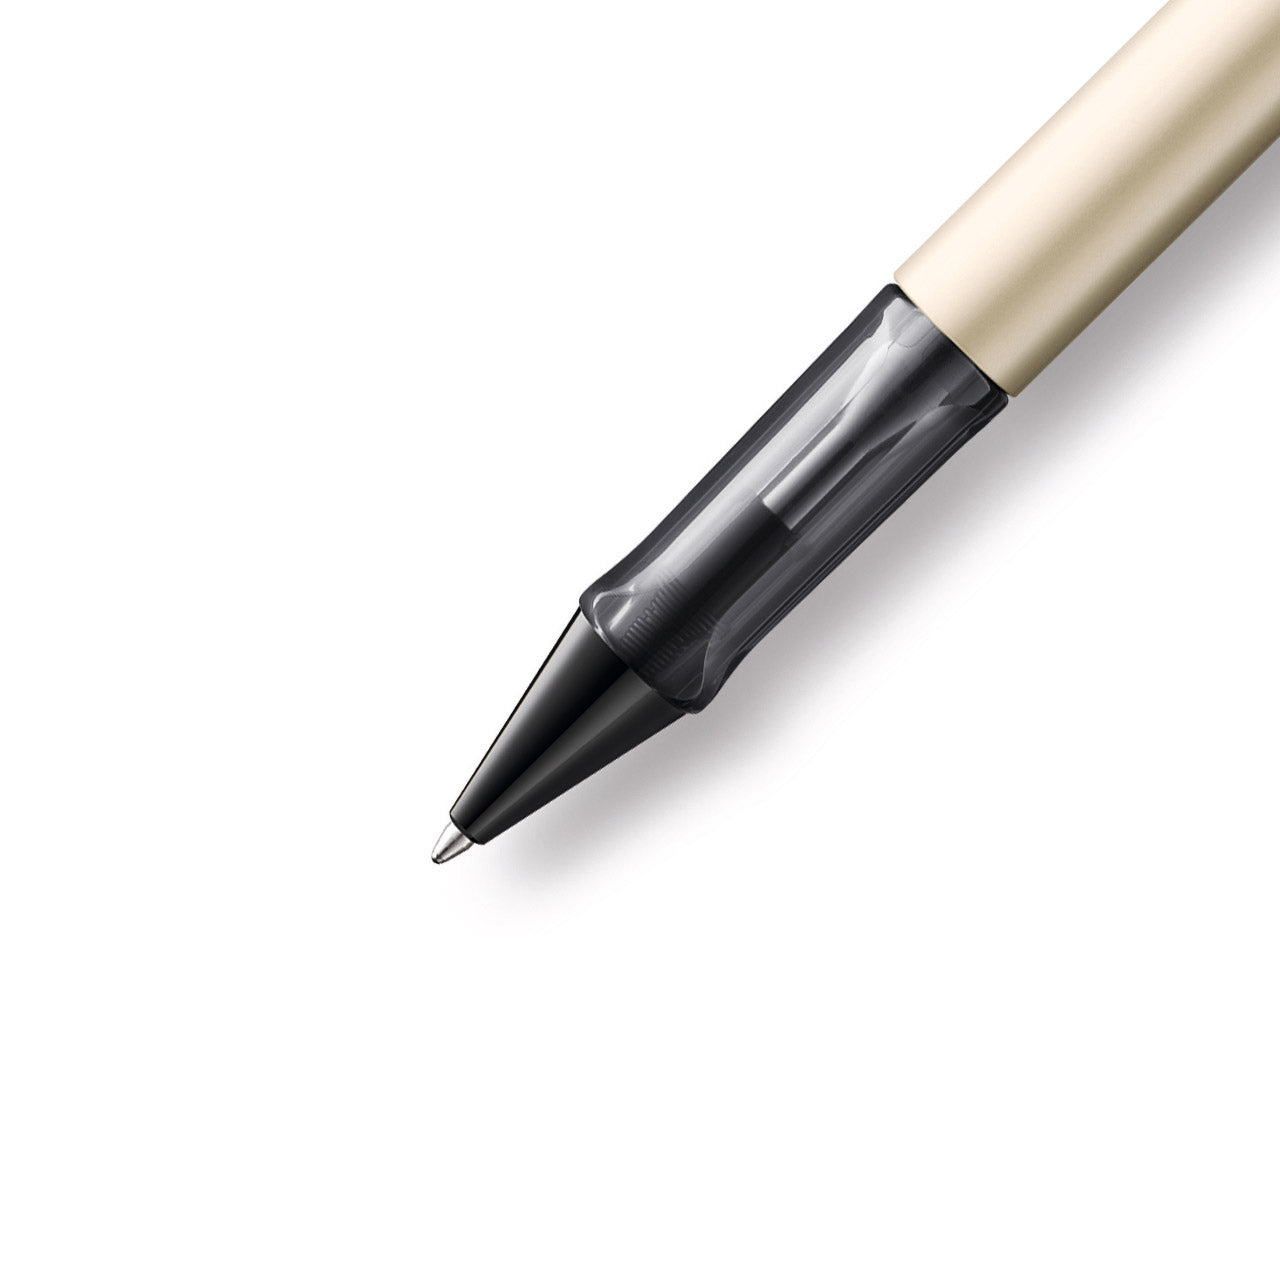 Lamy_LM-258_02_Simple_Beautiful_Things